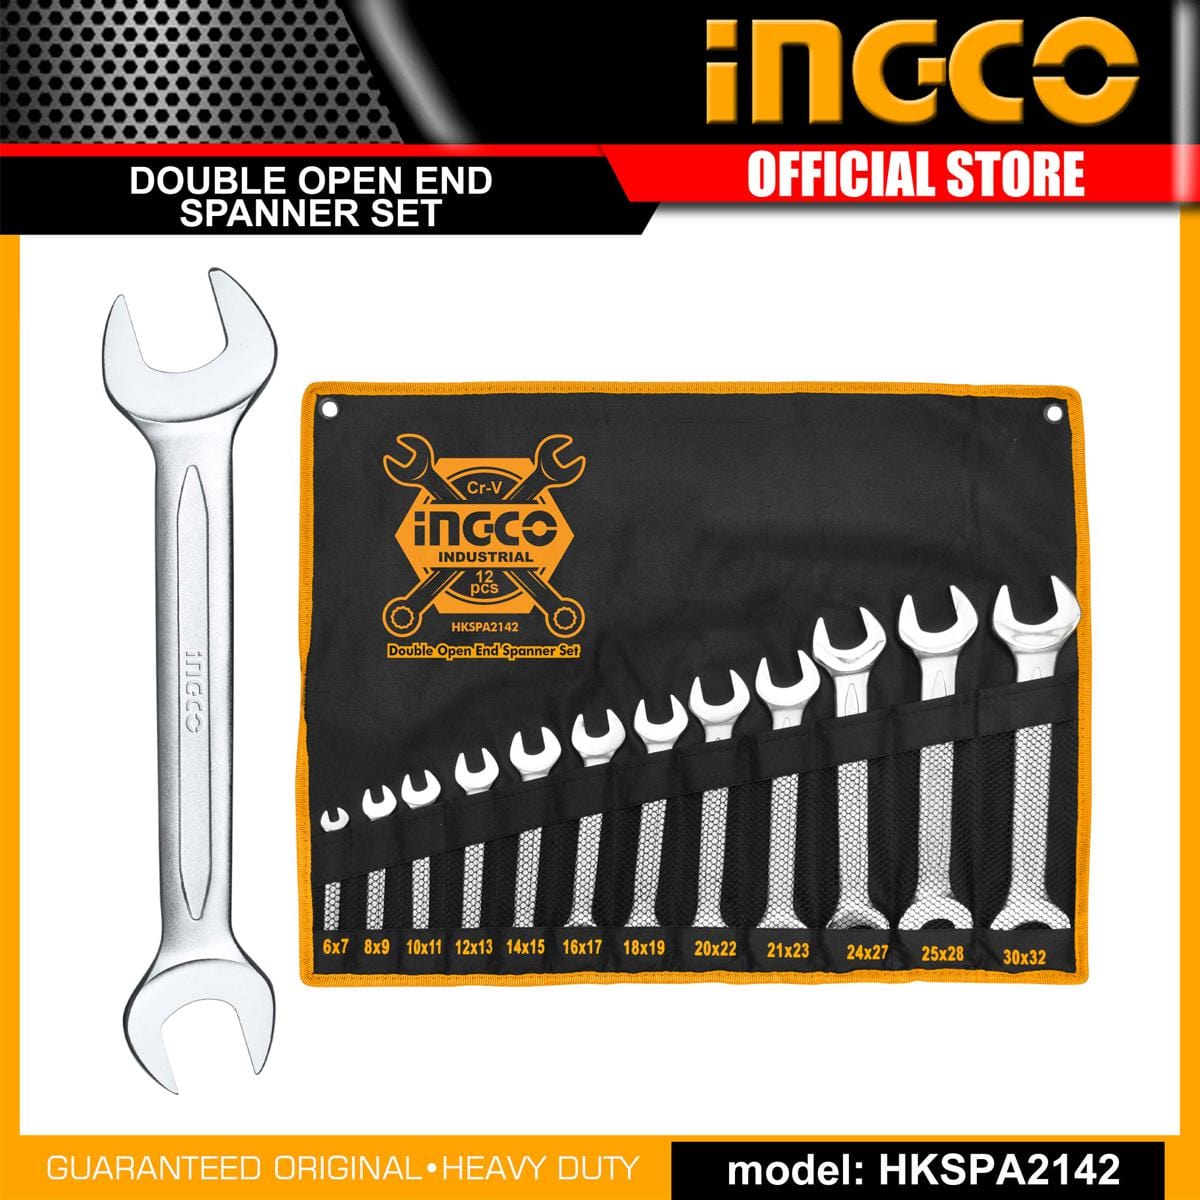 Ingco 12 Pieces Double Open End Spanner Set (HKSPA2142) - Precision Mechanics Toolkit | Supply Master Ghana Wrenches Buy Tools hardware Building materials